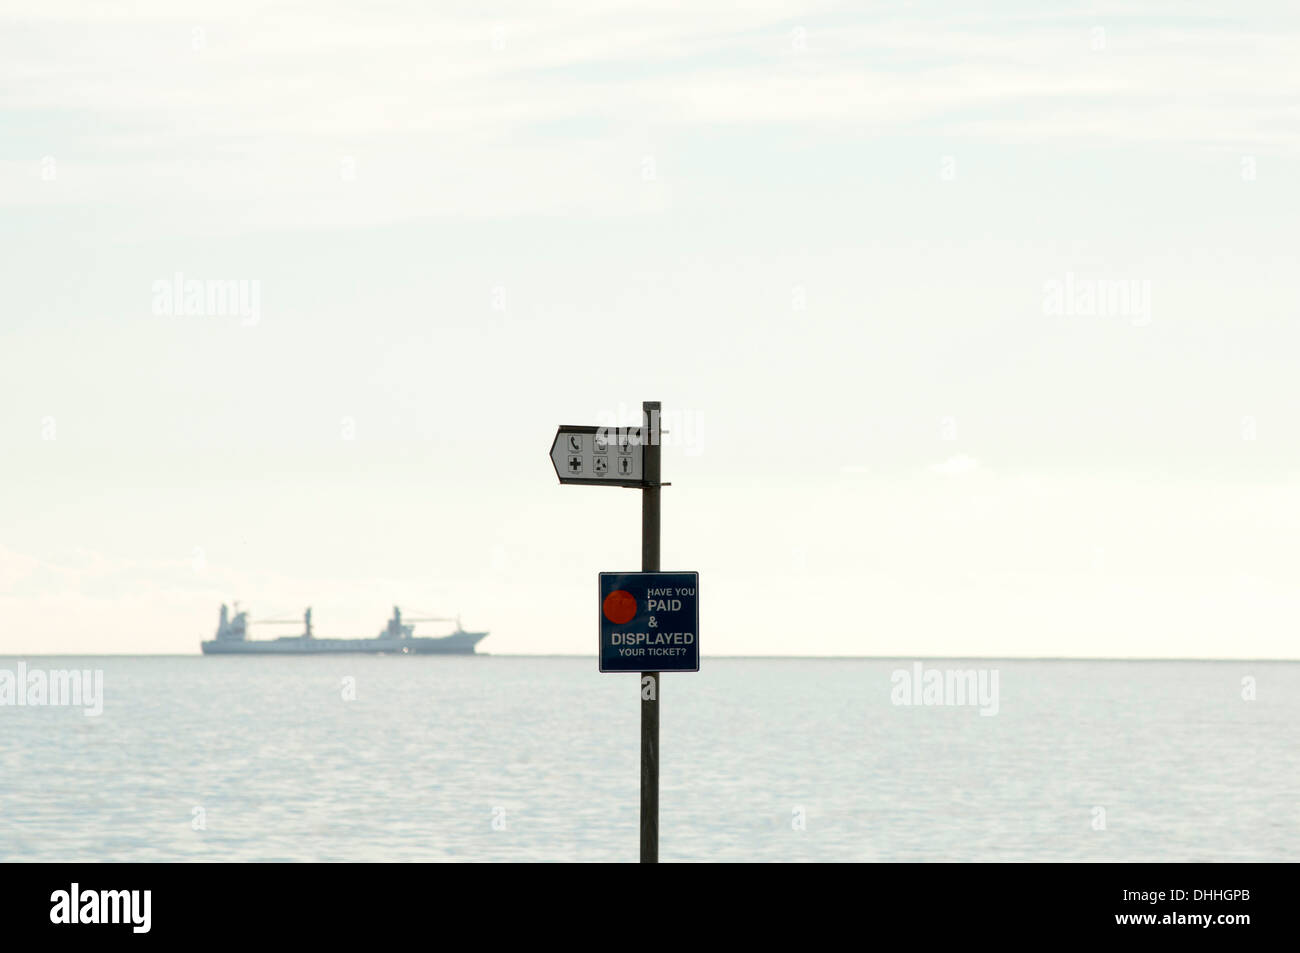 Ship on horizon with pay and display parking sign in foreground Stock Photo